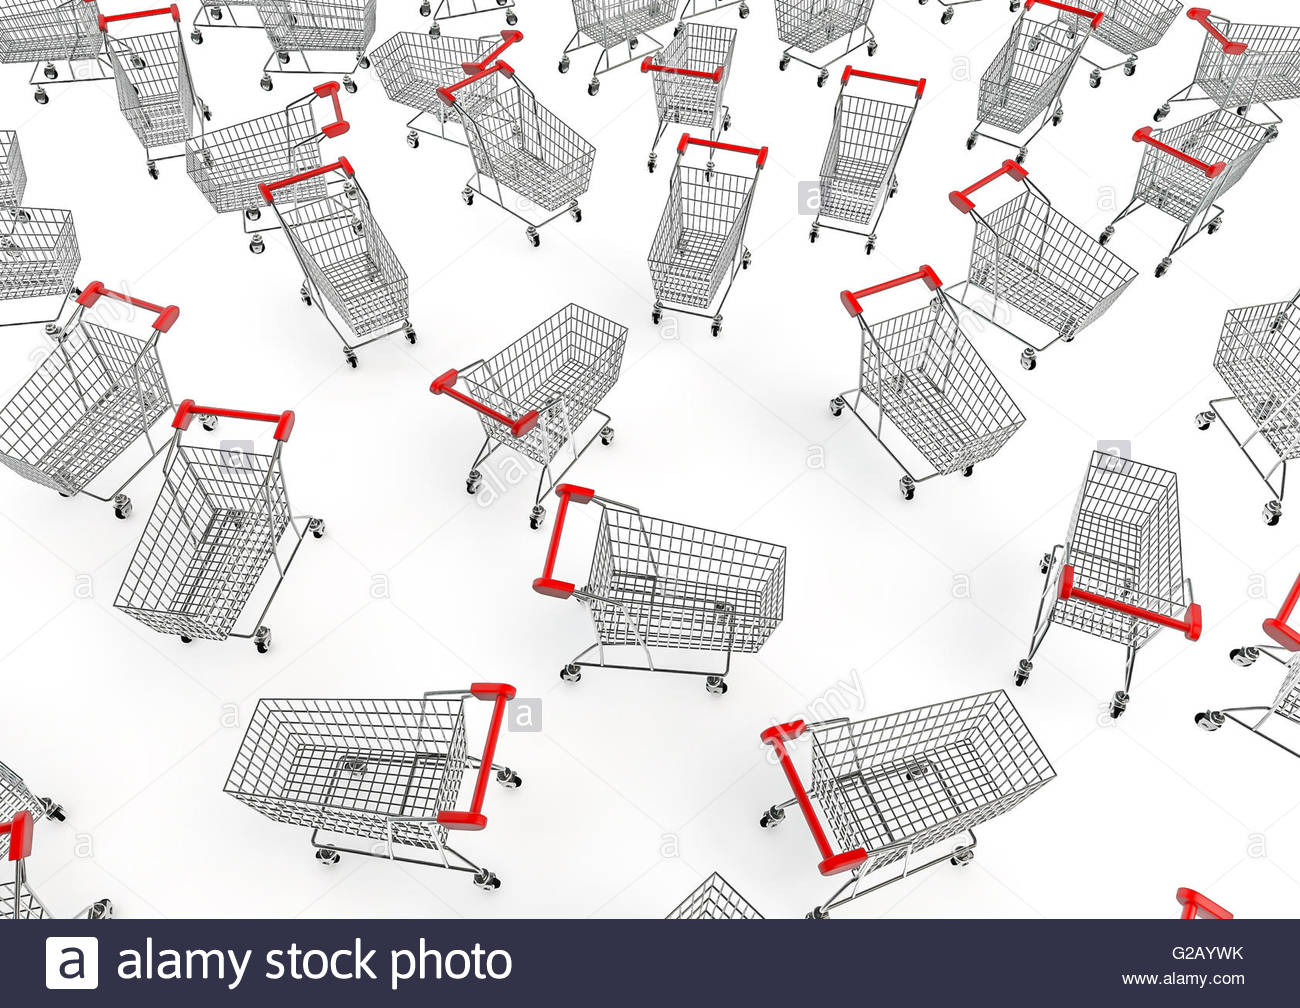 Shopping Trolley Background 3d Render Of Trolleys Stock